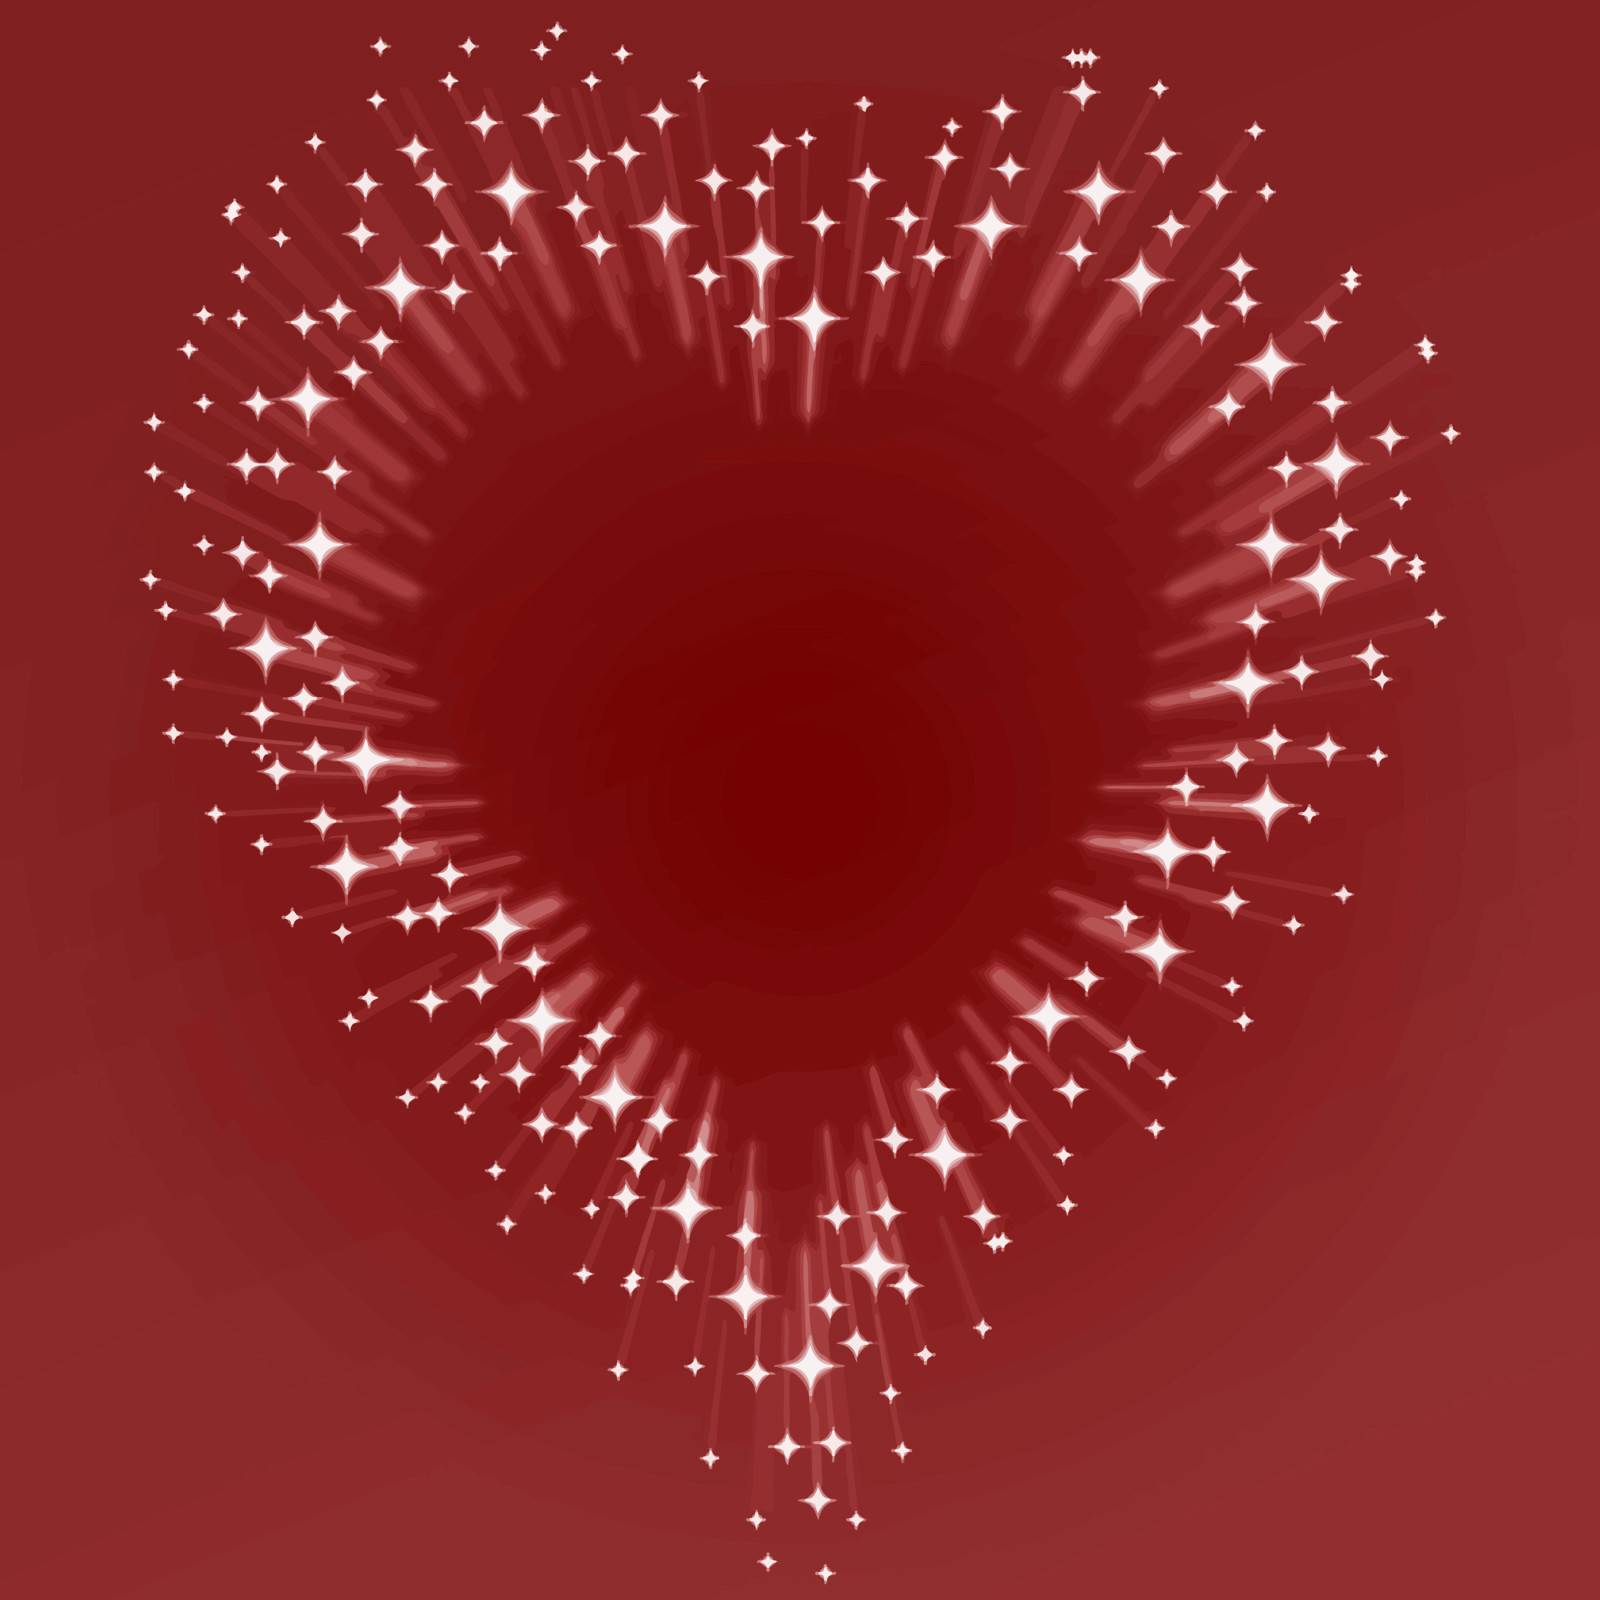 starburst heart by clearviewstock